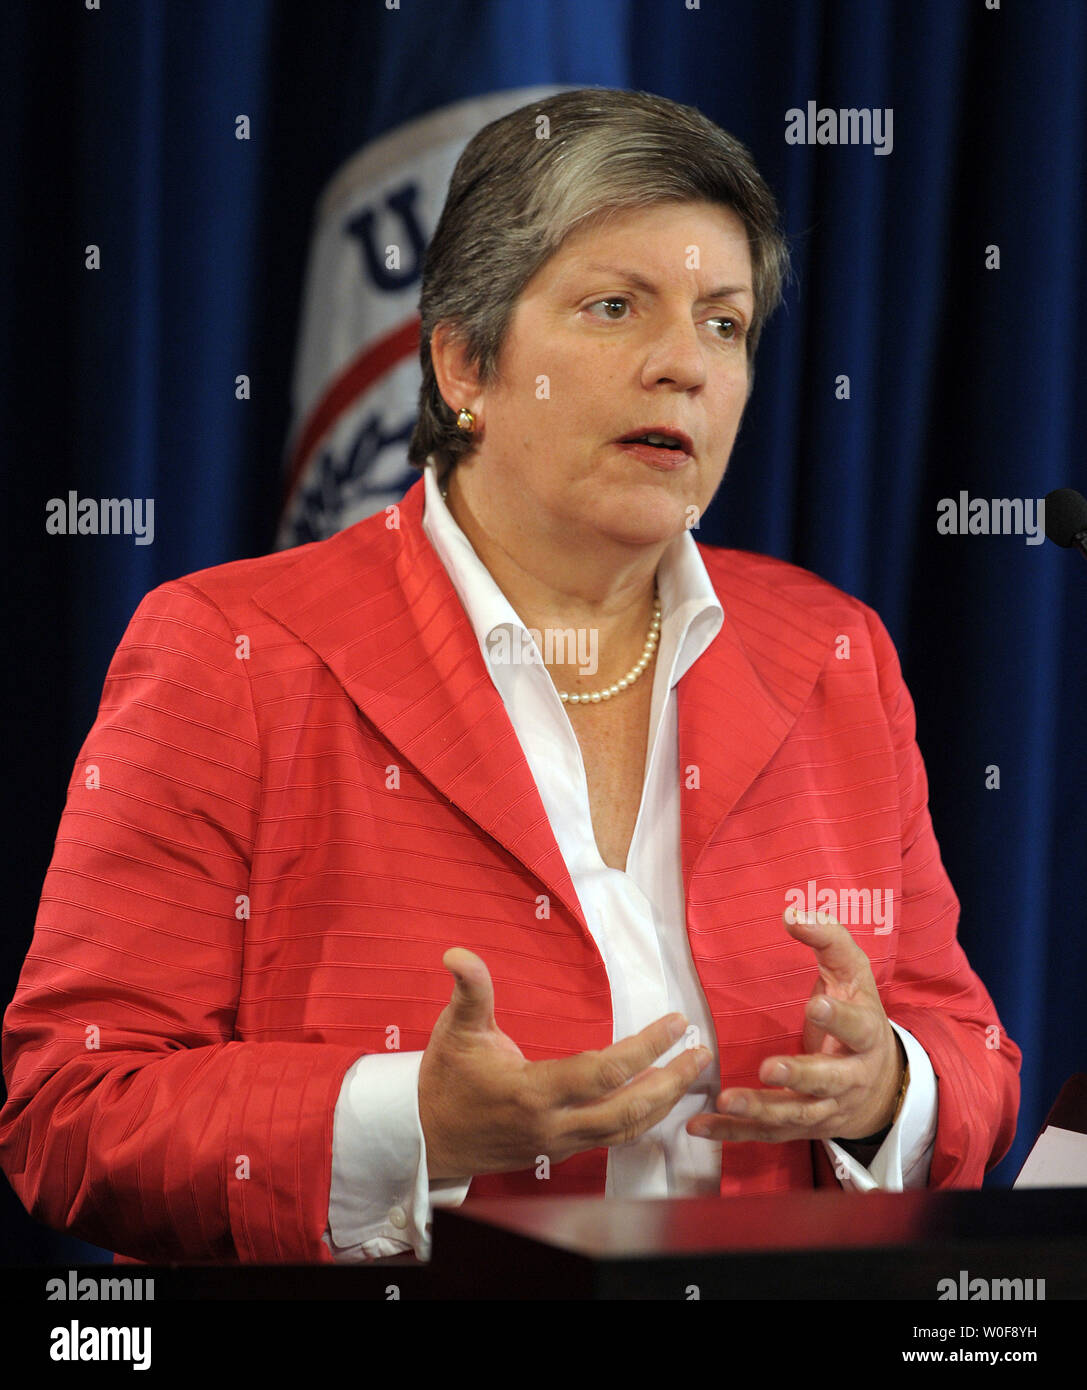 Secretary of Homeland Security Janet Napolitano speaks during a news conference announcing new initiatives concerning the detention of illegal immigrants at ICE headquarters in Washington on October 6, 2009.    UPI/Roger L. Wollenberg Stock Photo